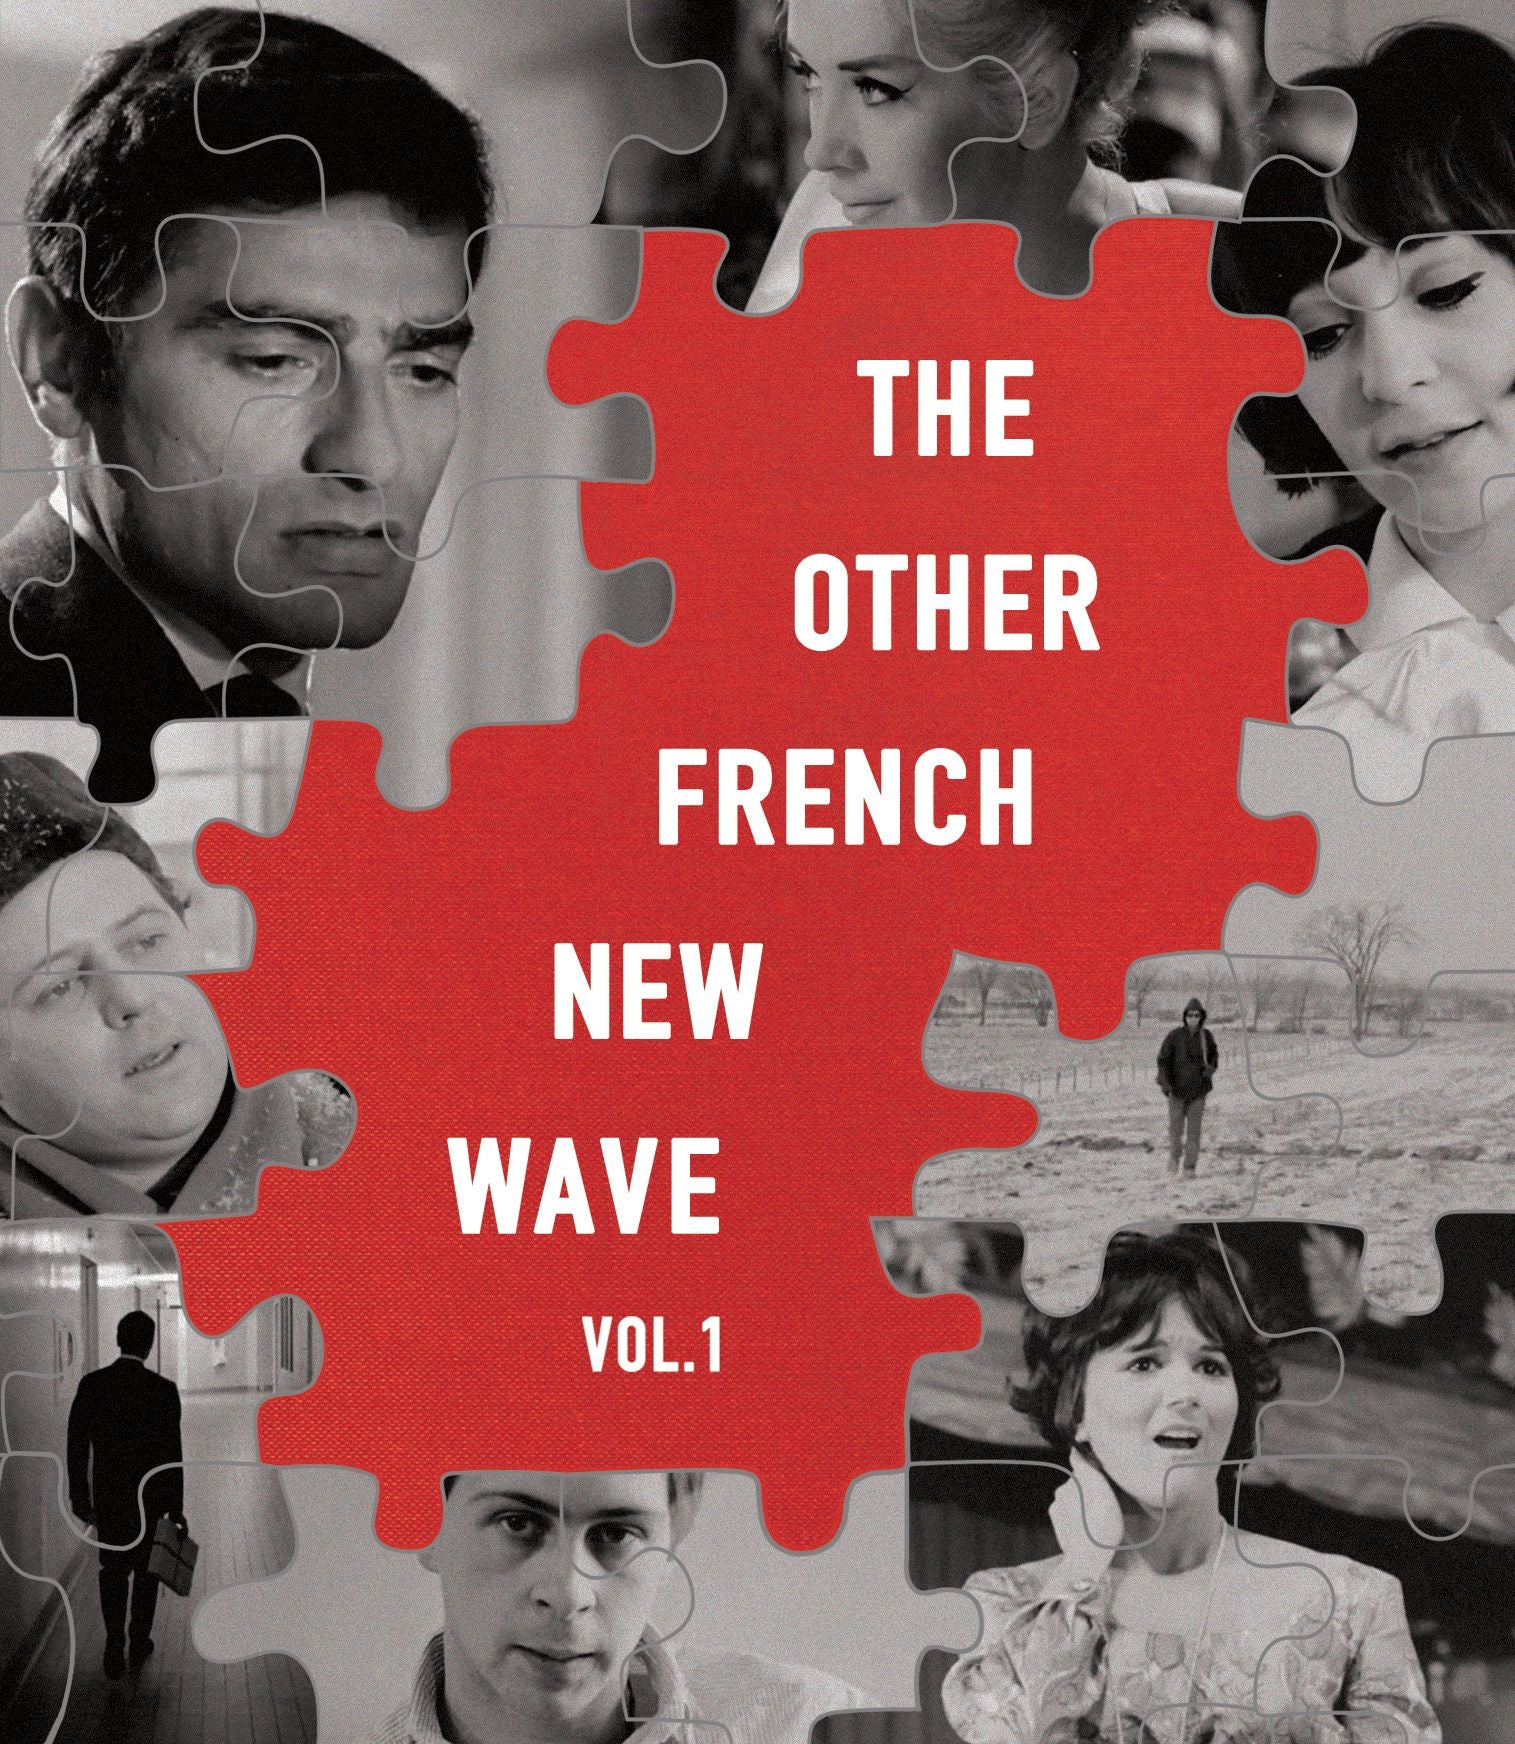 THE OTHER FRENCH NEW WAVE VOLUME 1 BLU-RAY